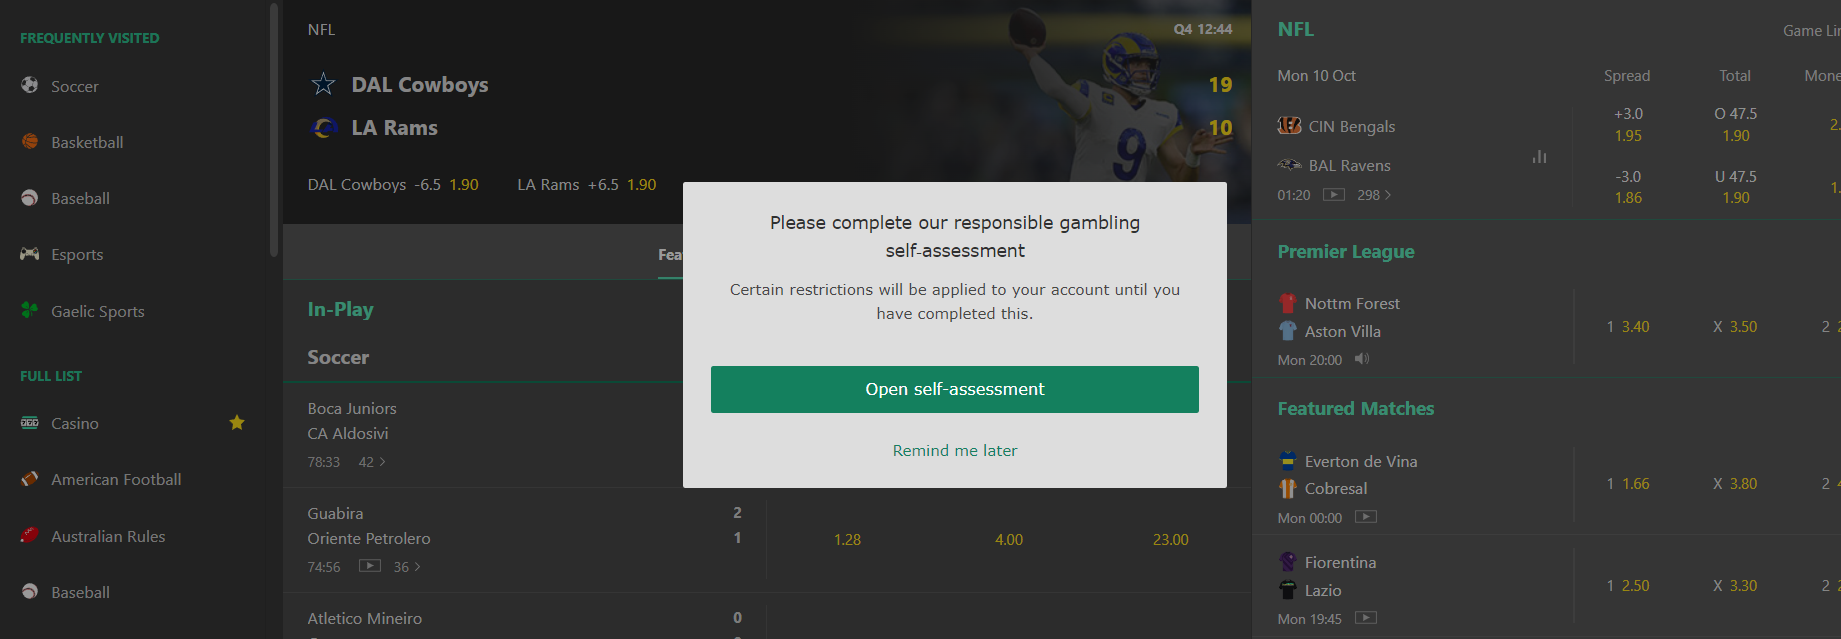 bet365 4 questions